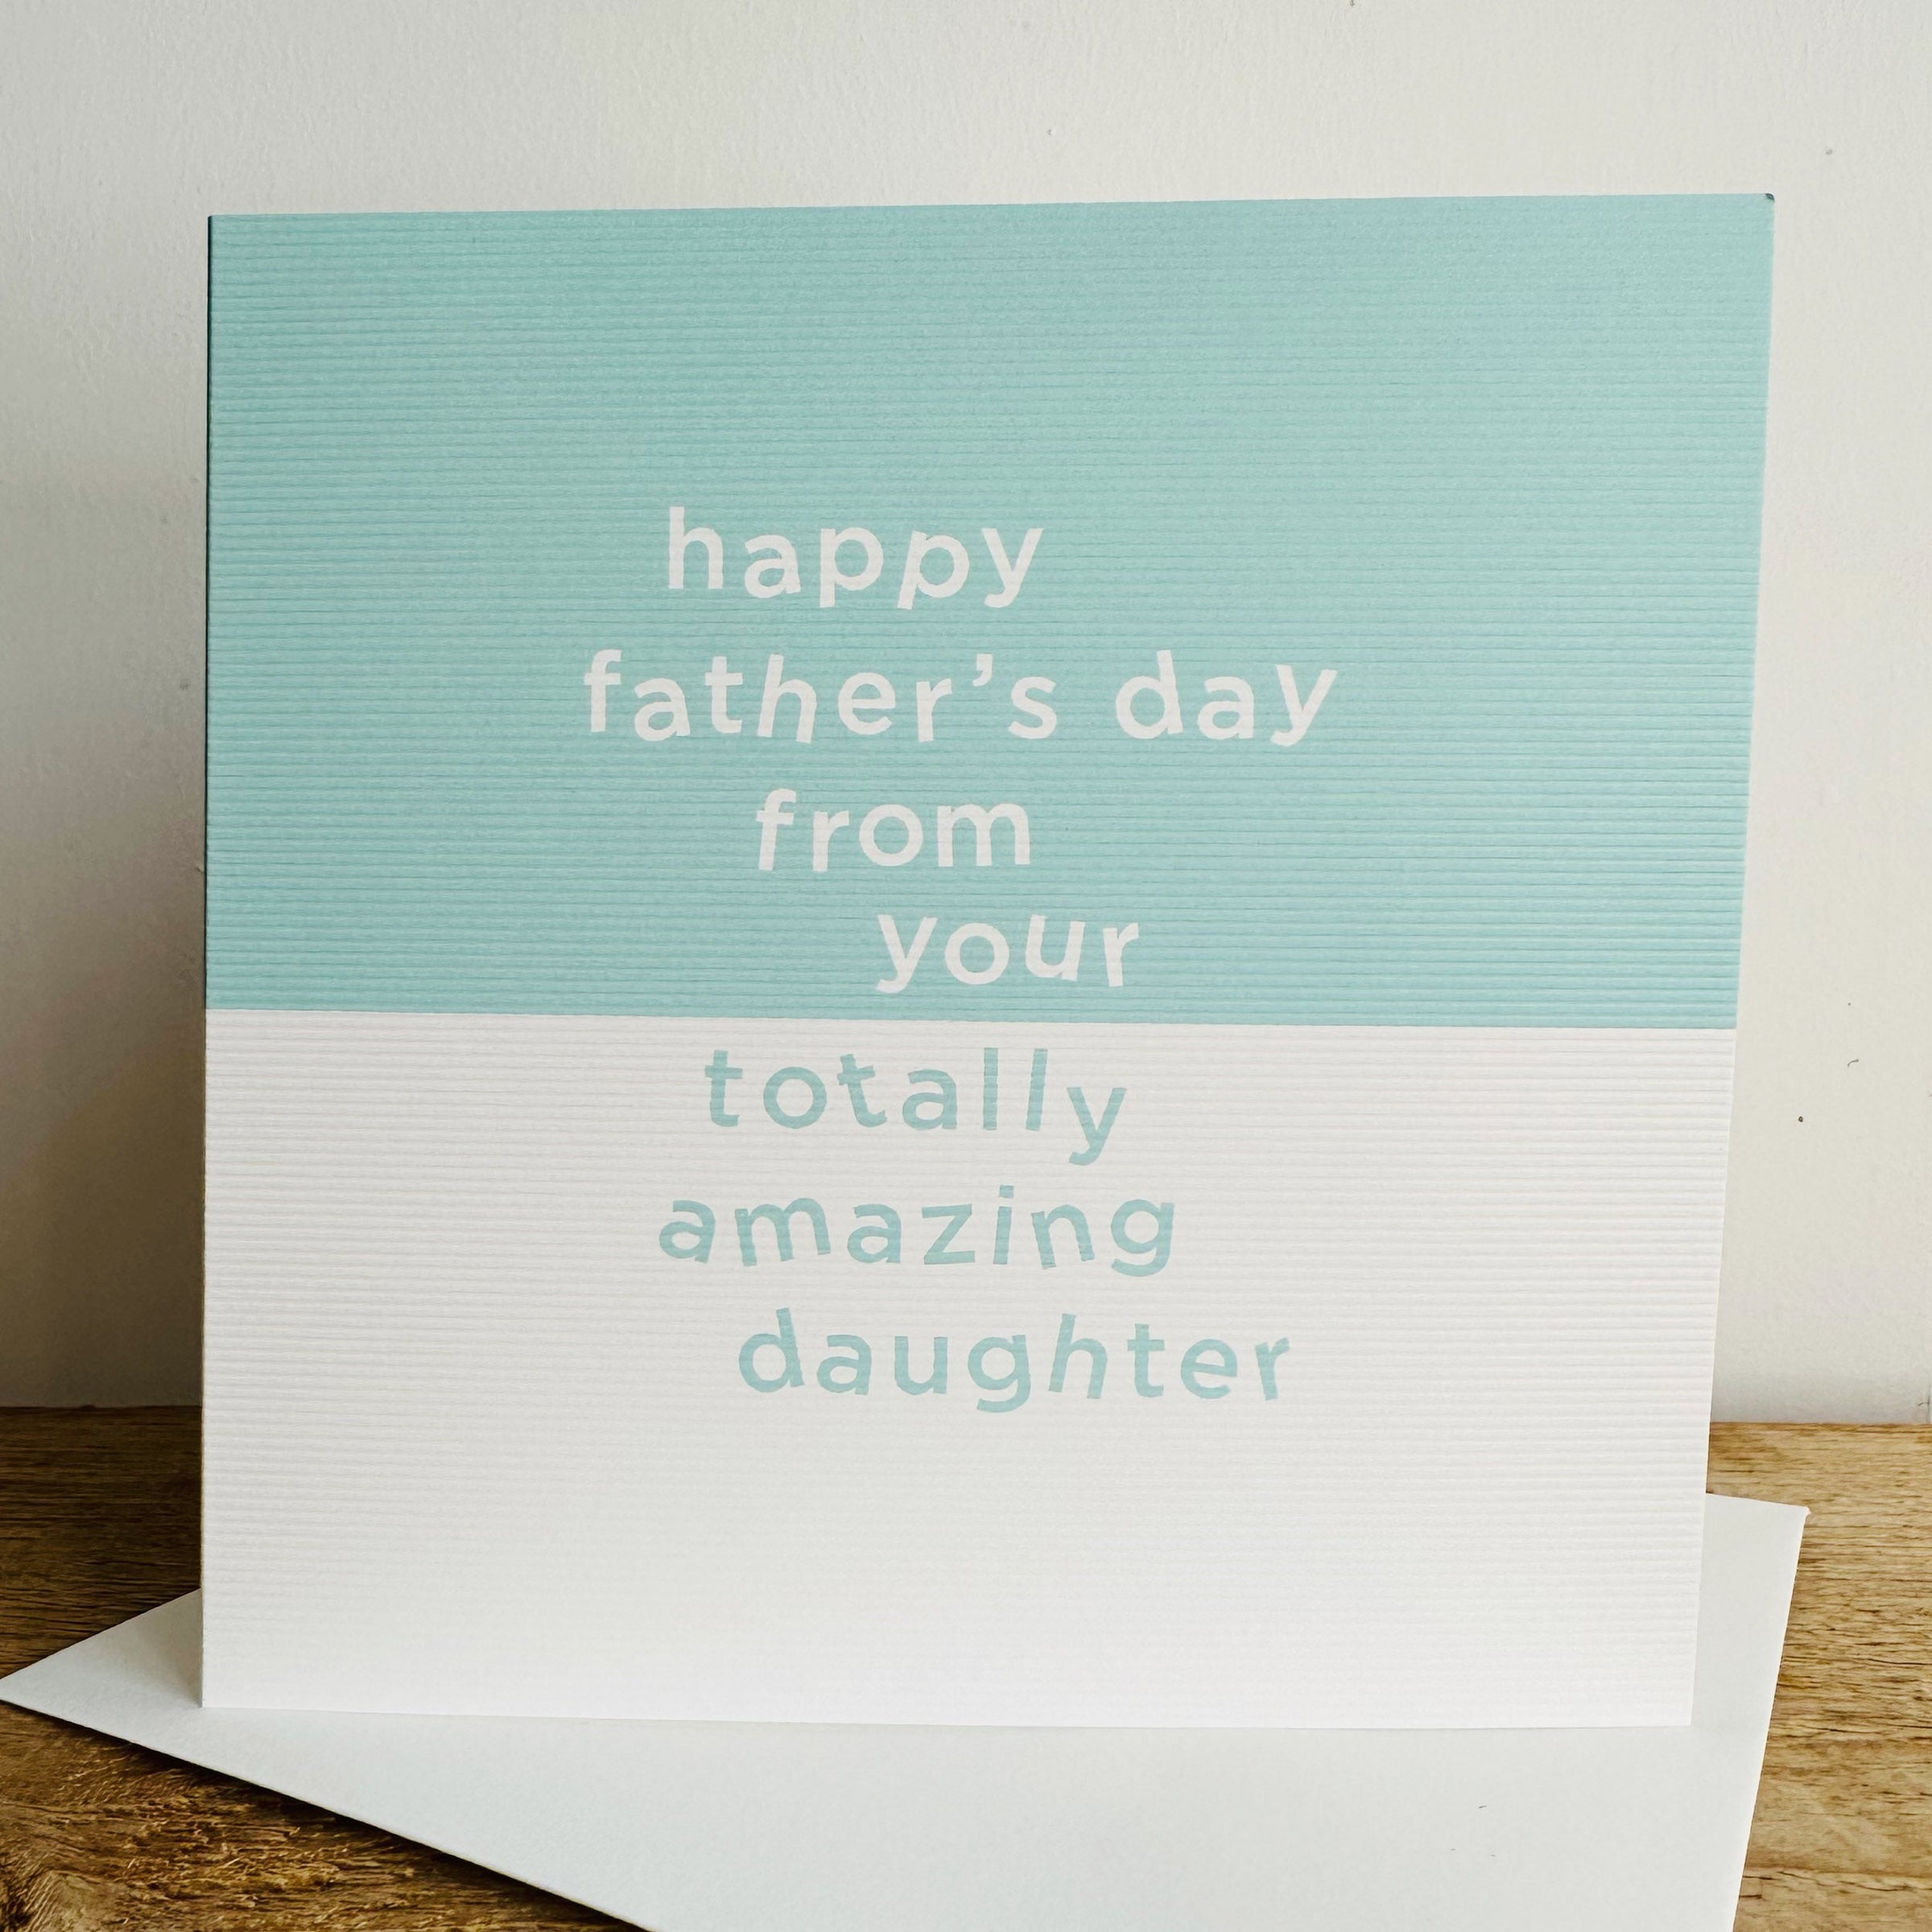 From Your Totally Amazing Daughter